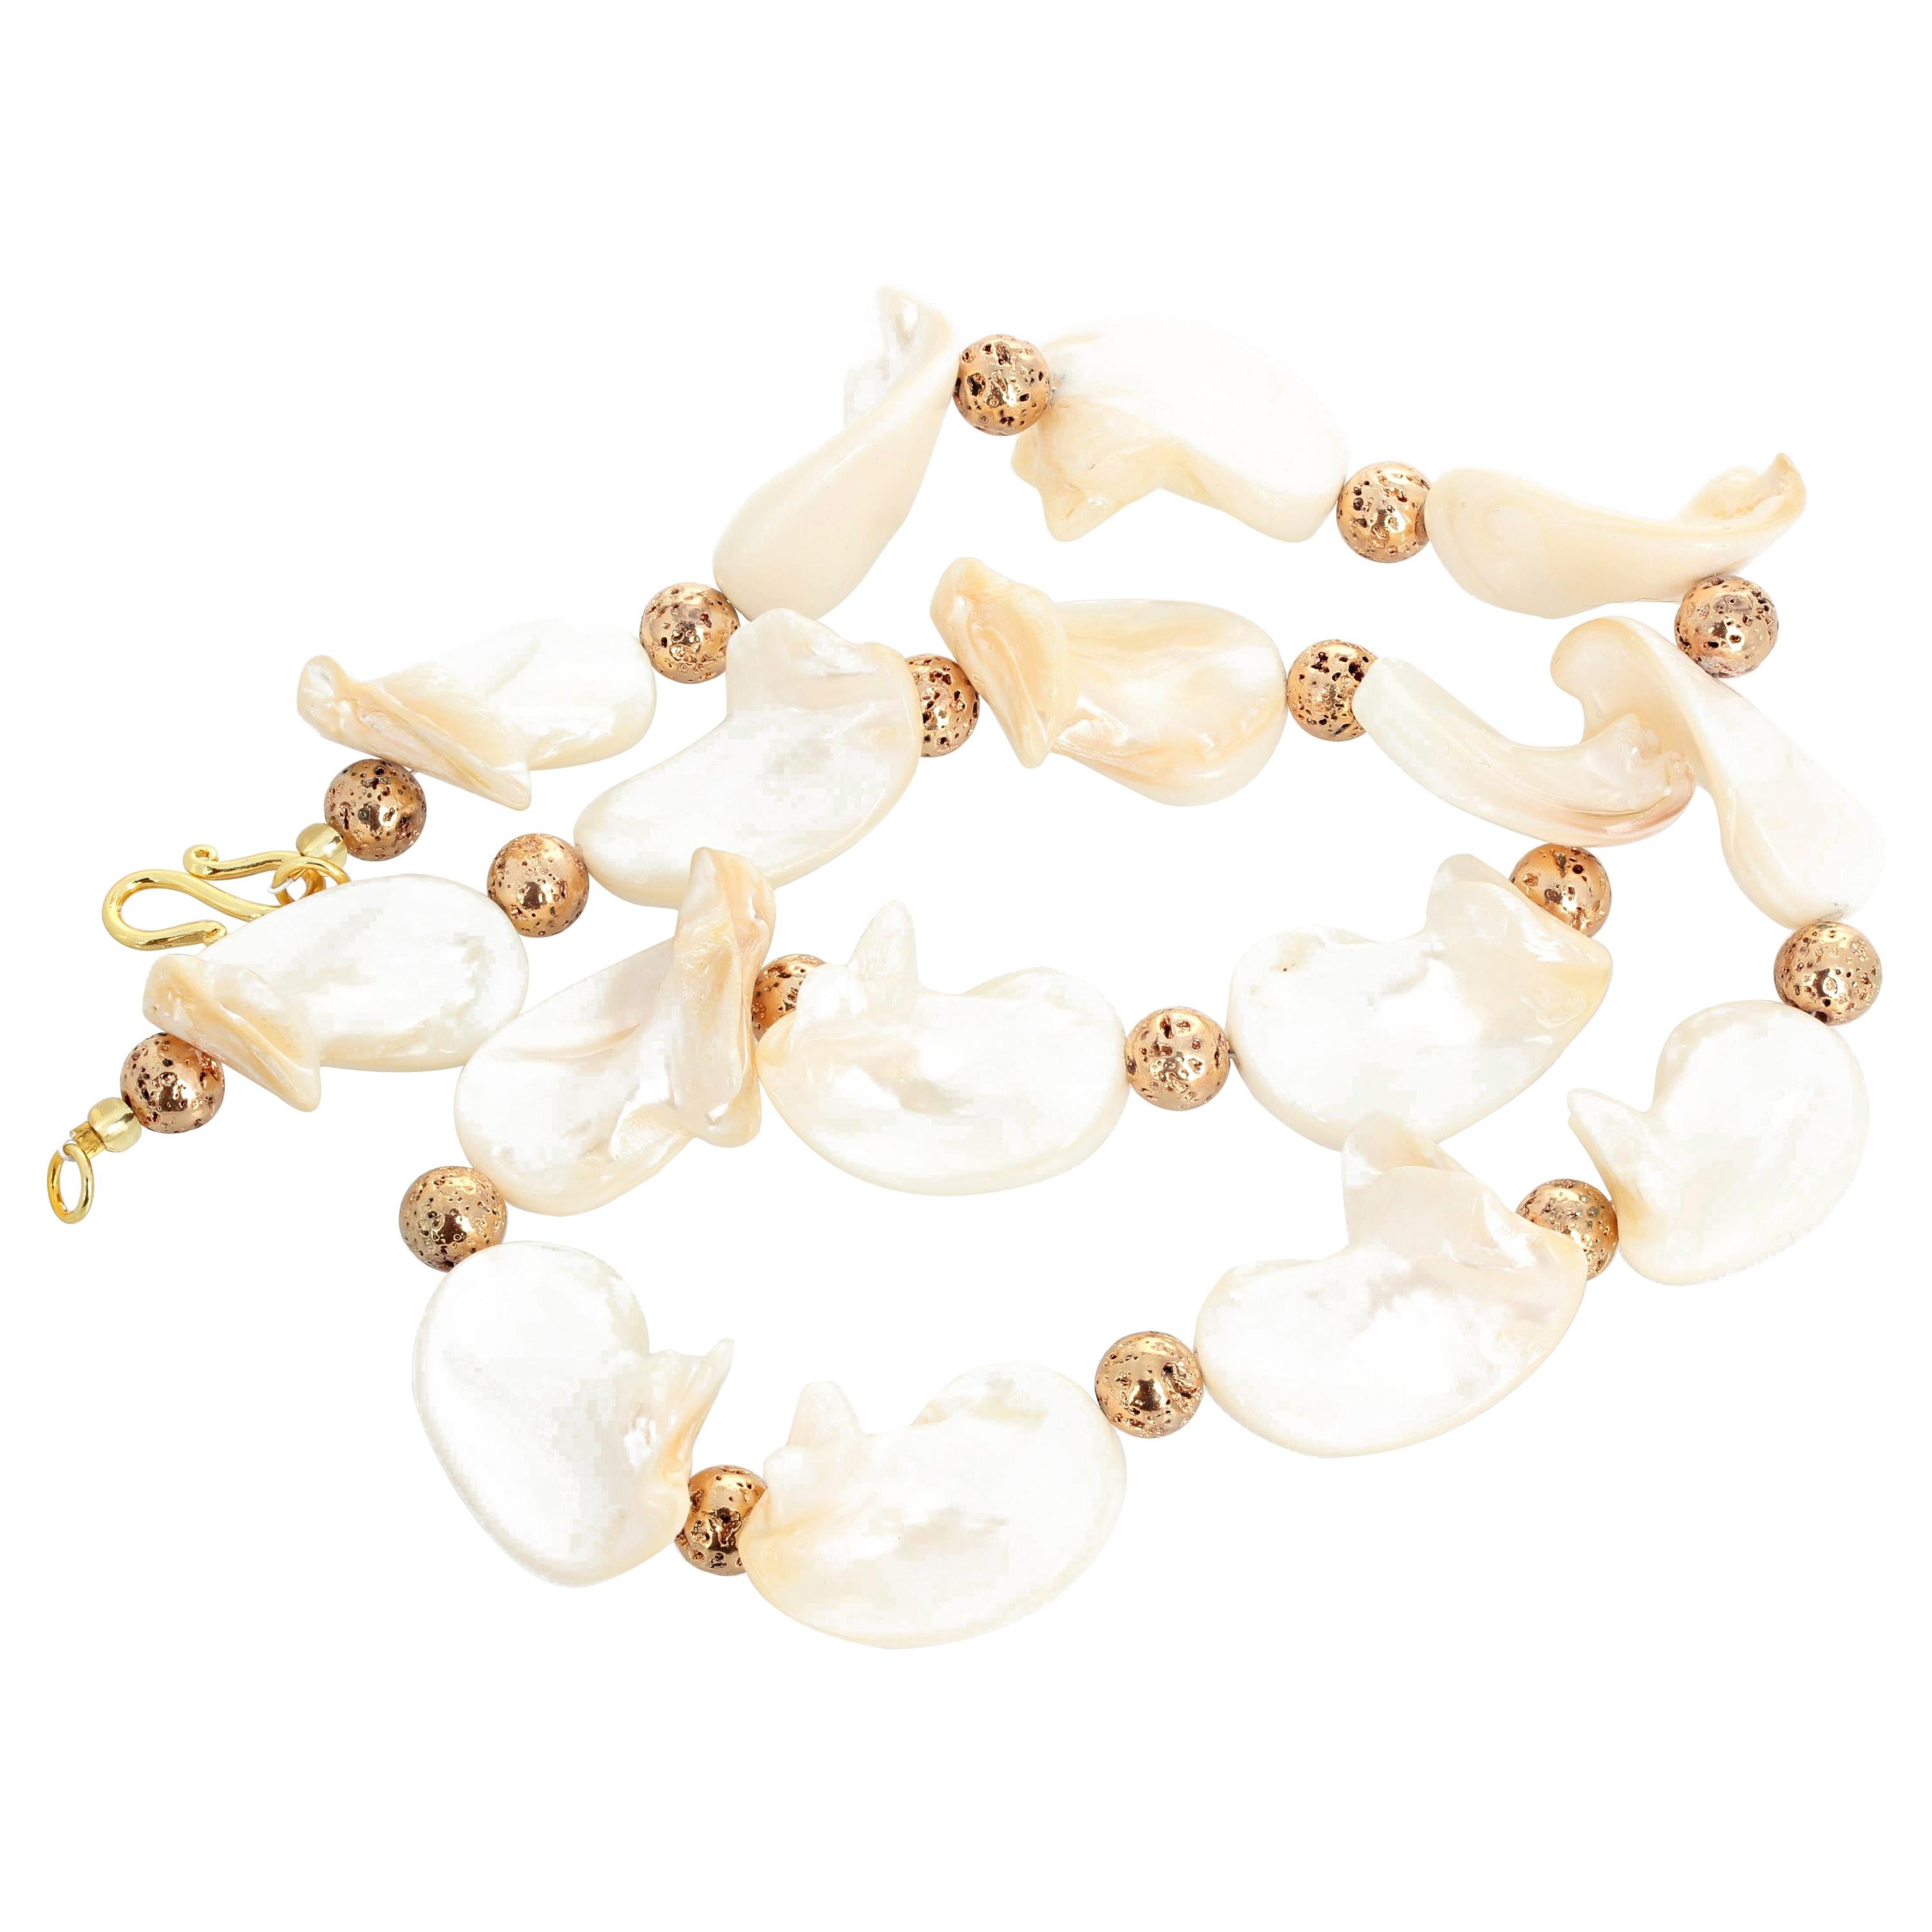 Dramatic beautifully glowing natural Shells accented with gold plated round natural Lava enhance each other elegantly in this 23 inch long necklace with a gold plated hook clasp.  